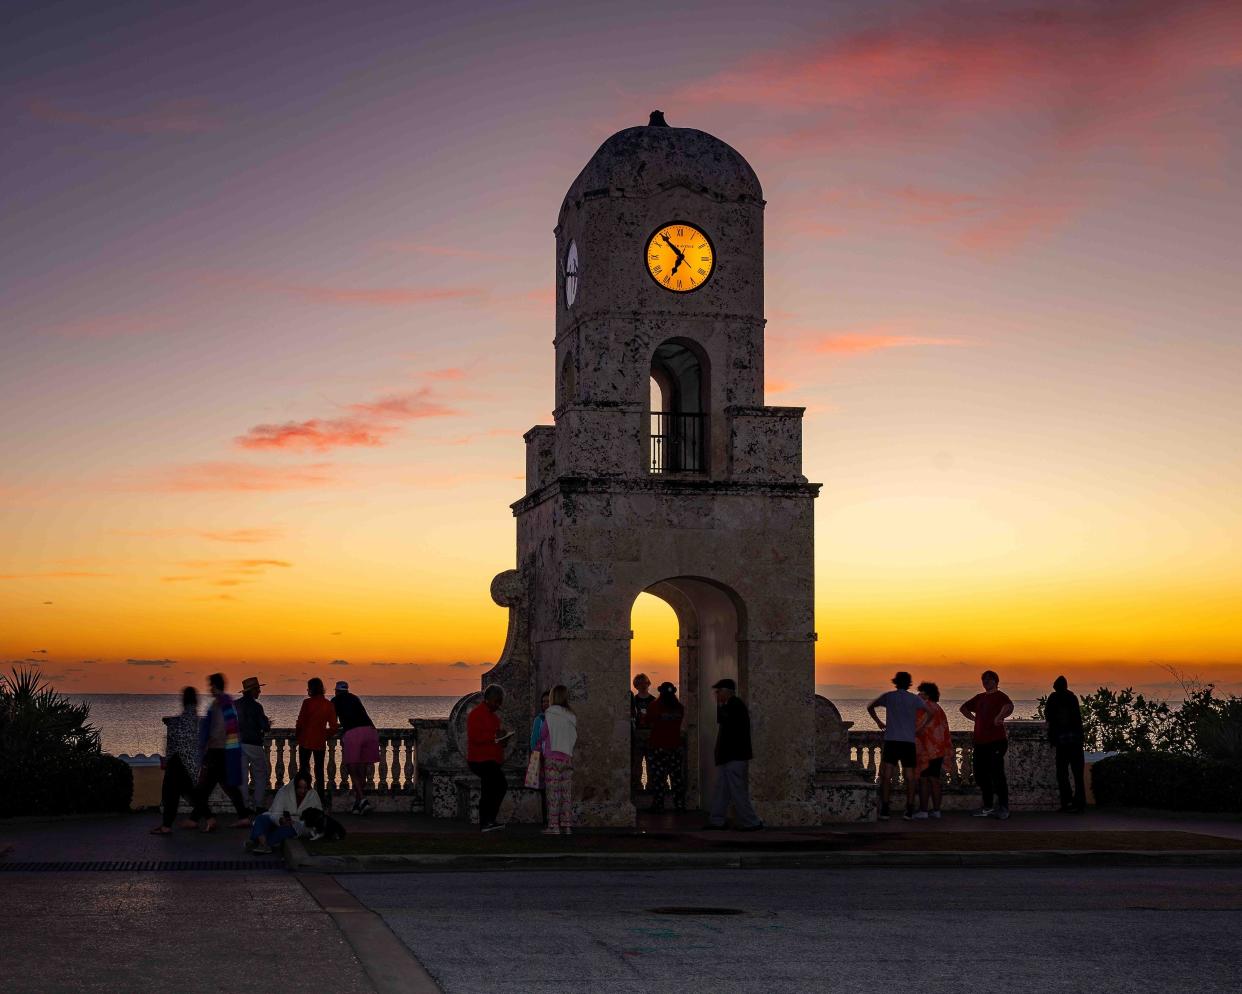 Locals gather for the traditional sunrise photo at the Palm Beach Clock Tower to help ring in the New Year on Jan. 1.